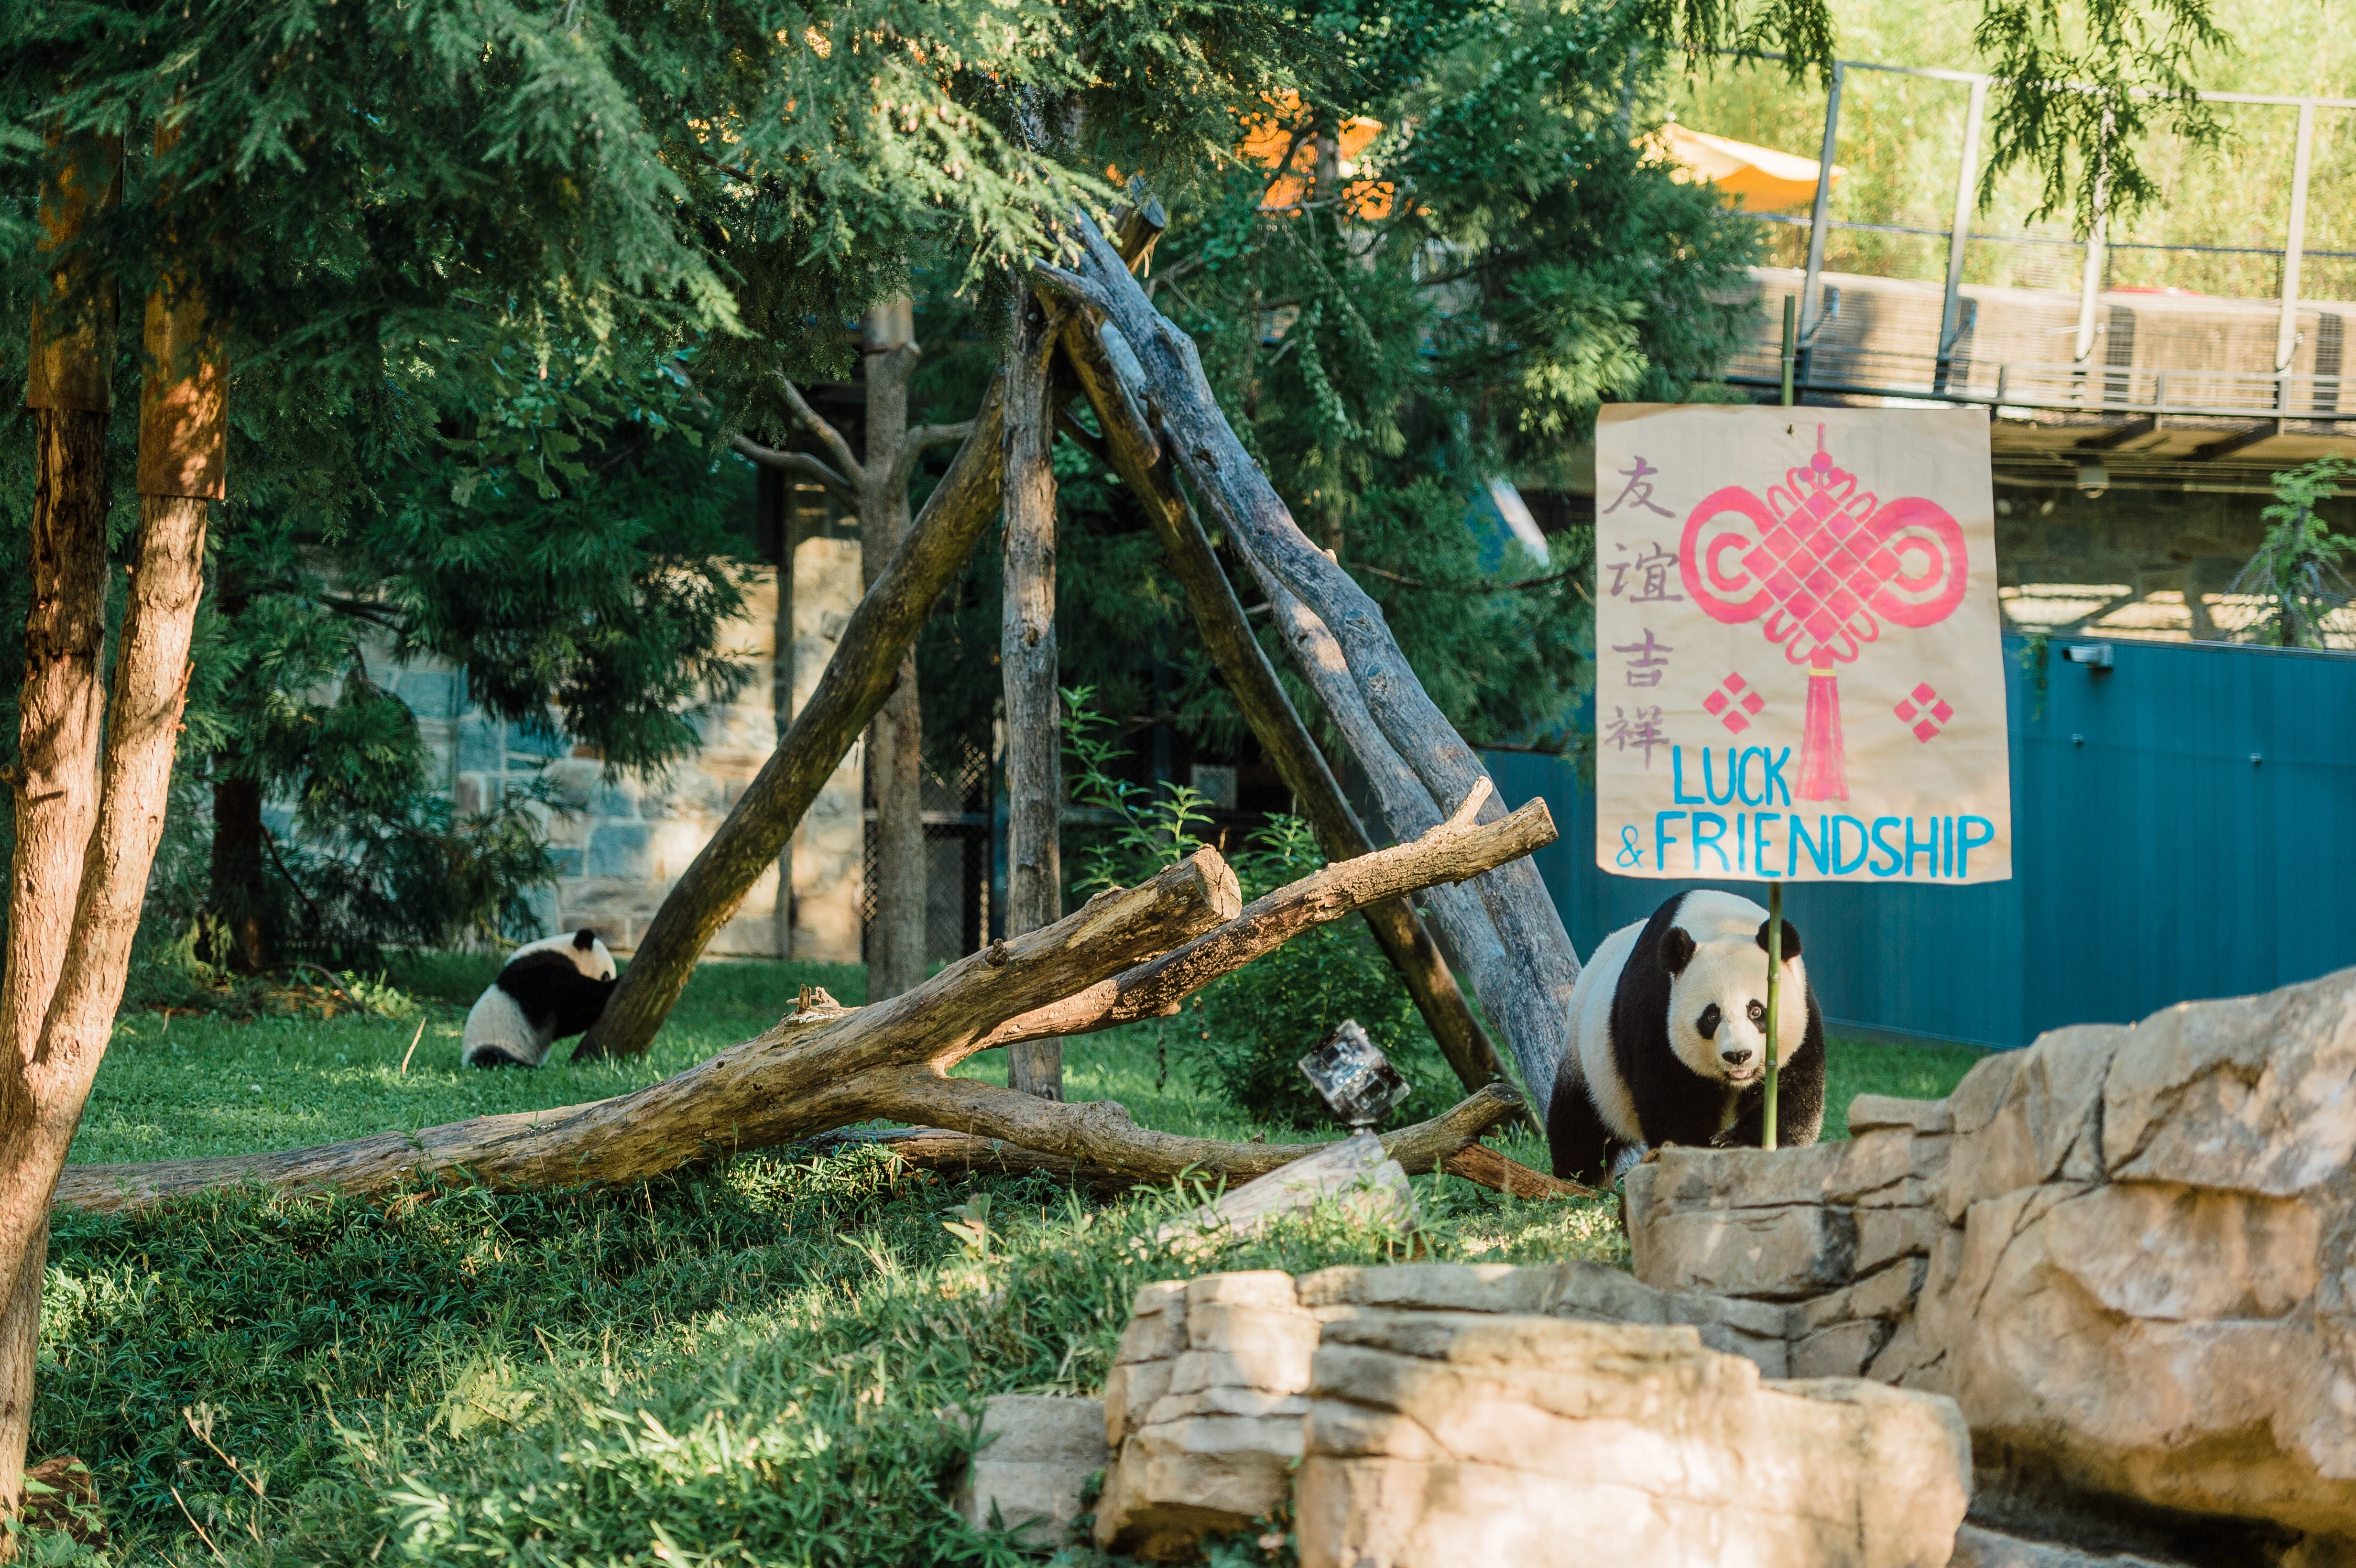 Giant panda Mei Xiang selects the Zhuazhou symbolizing luck and friendship on behalf of Bei Bei